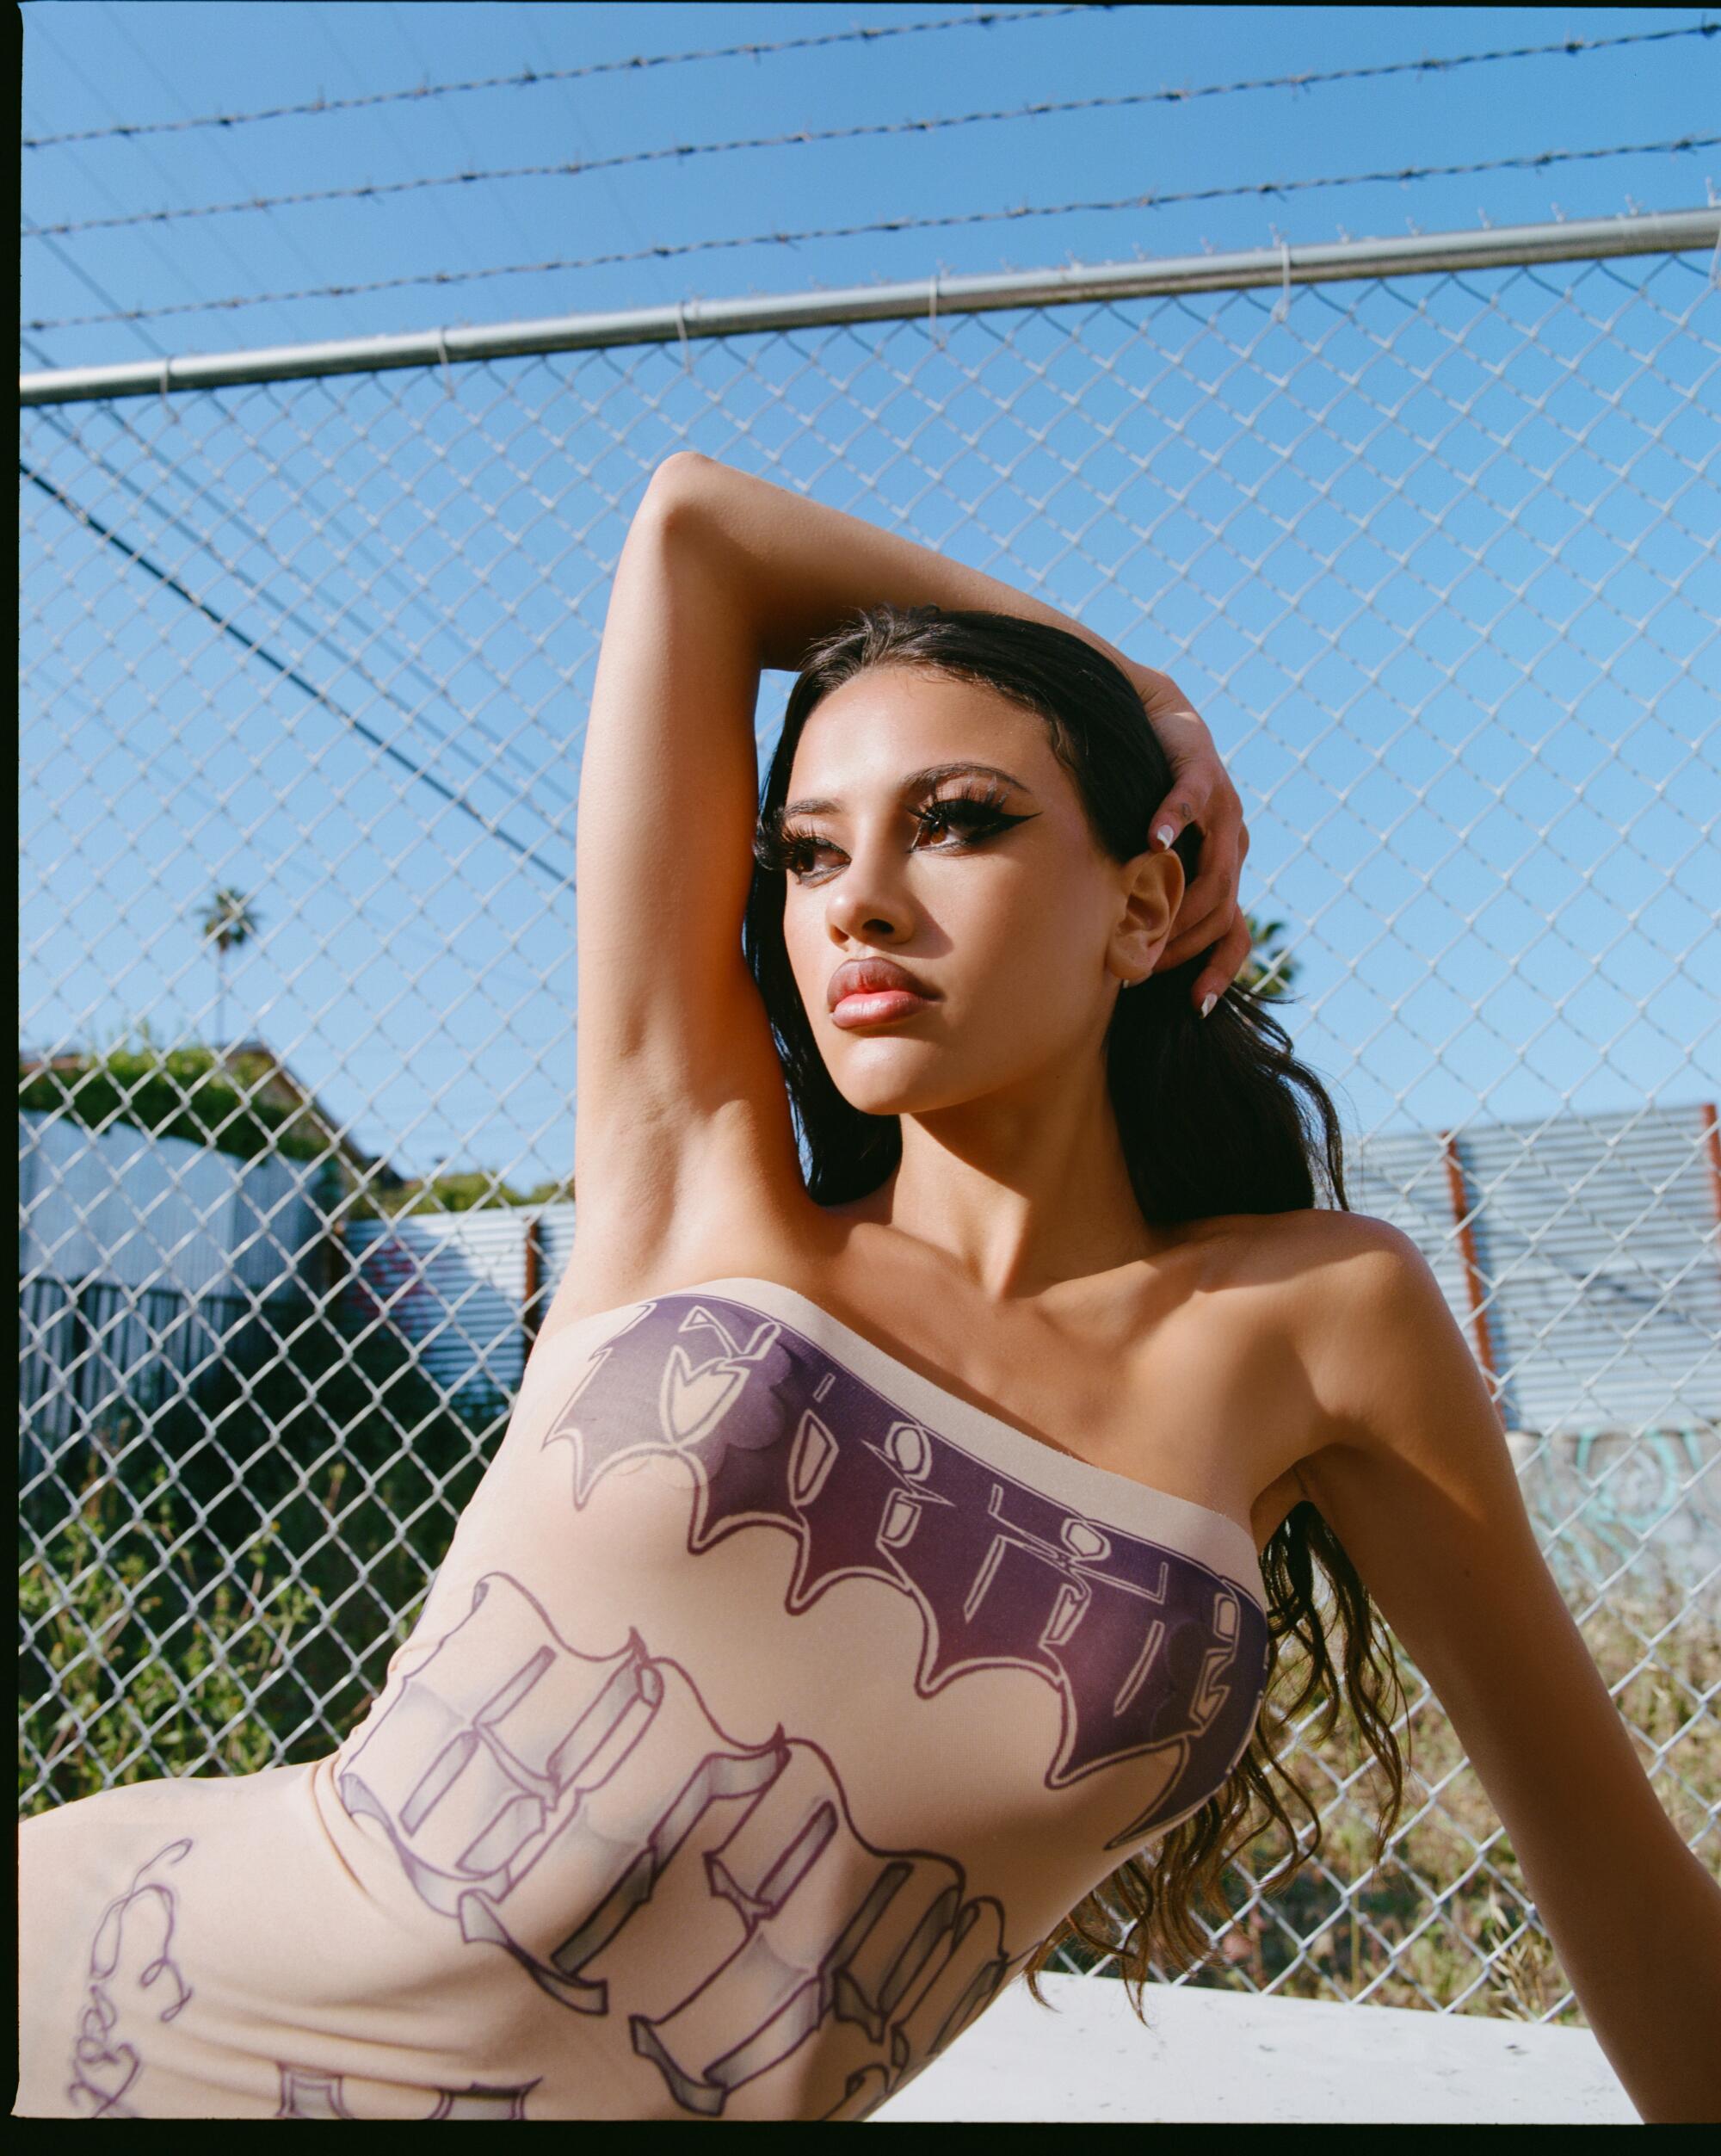 A model is photographed in front of a chain link fence in a dress that resembles tattoos.